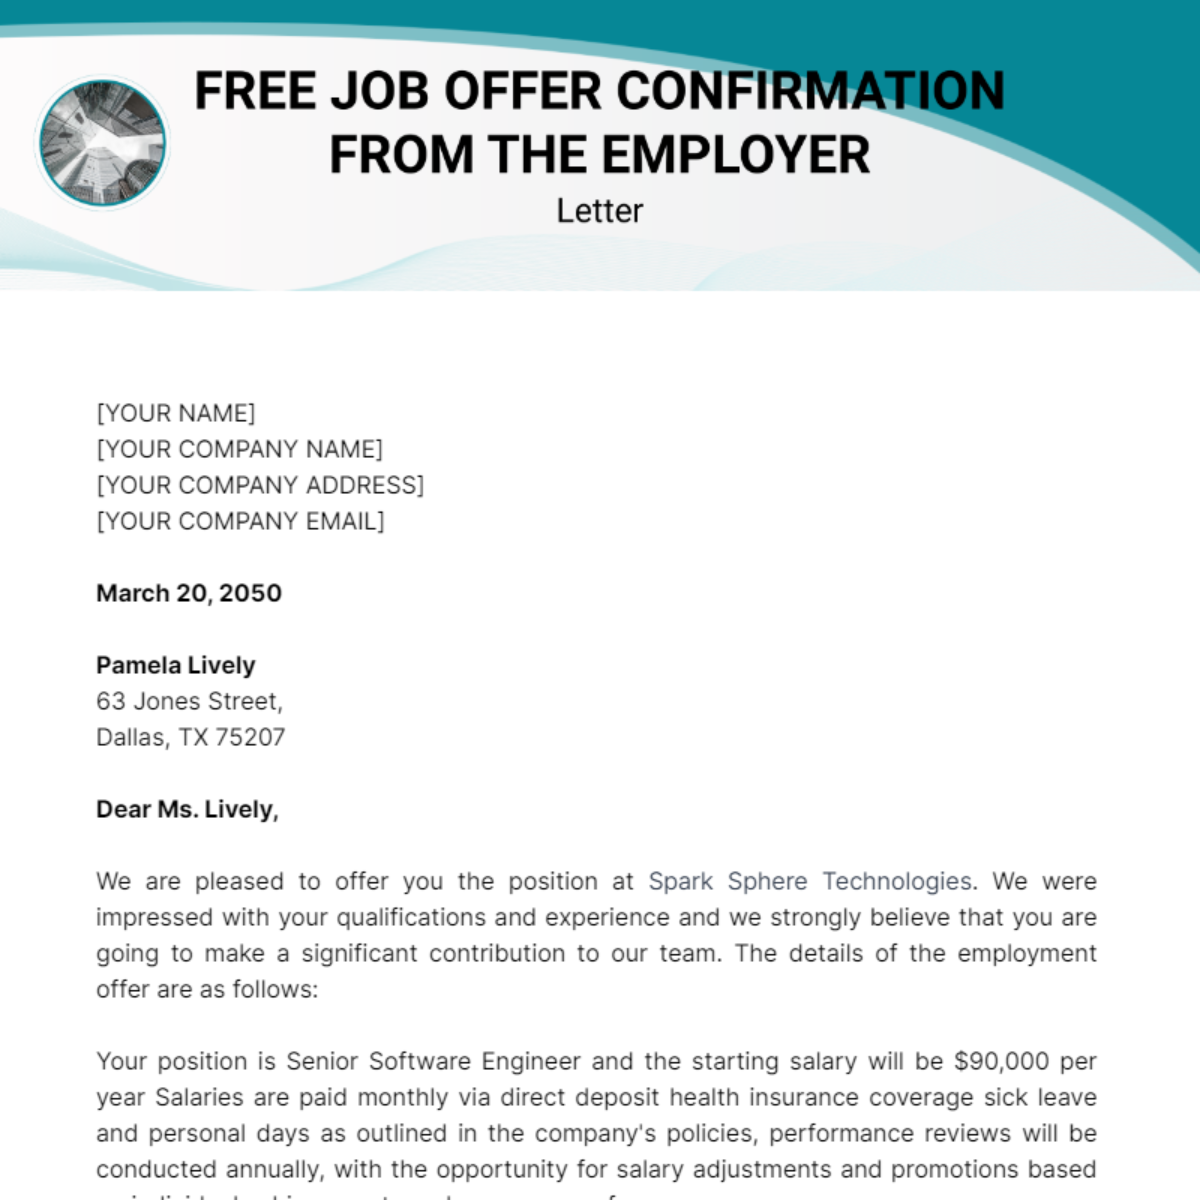 Job Offer Confirmation Letter from Employer Template